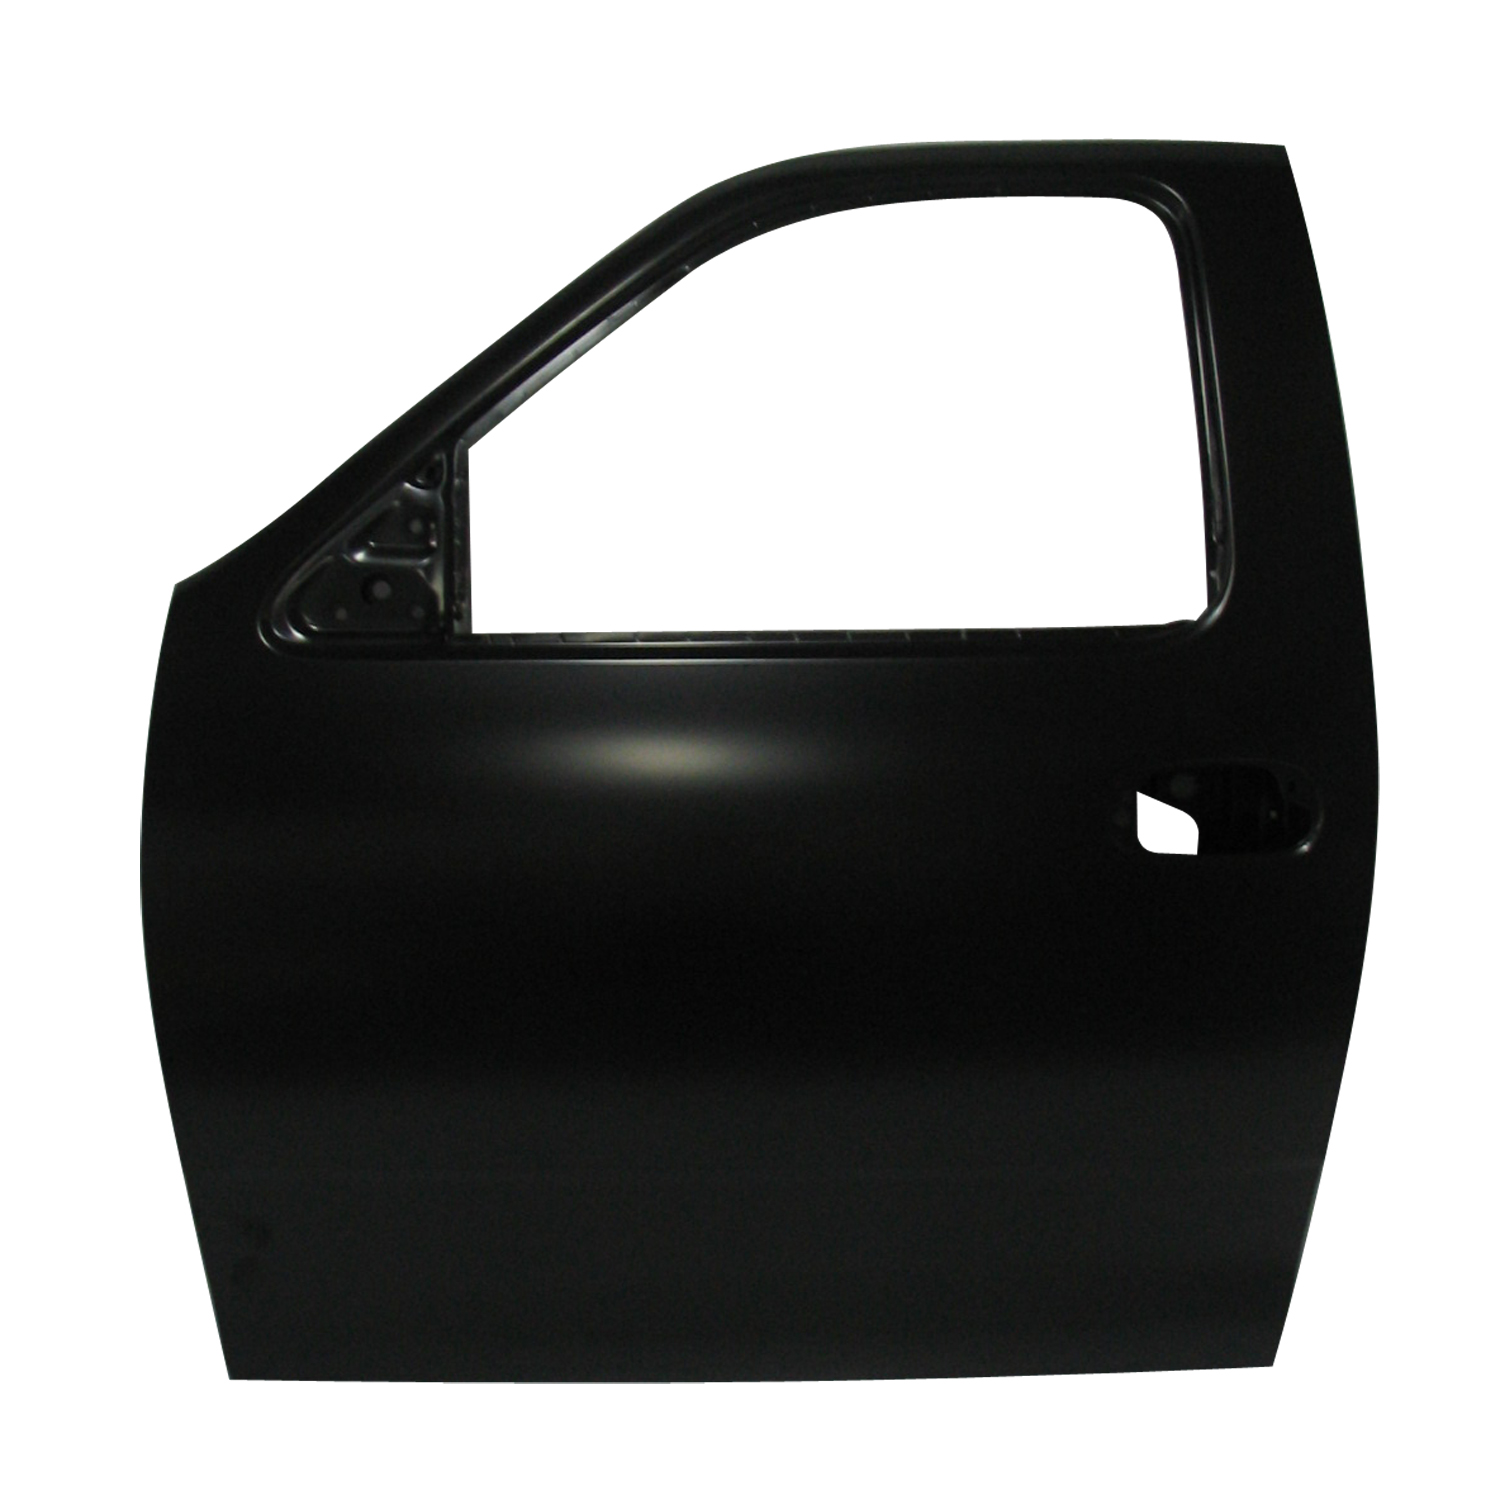 Aftermarket DOORS for FORD - F-150 HERITAGE, F-150 HERITAGE,04-04,LT Front door shell